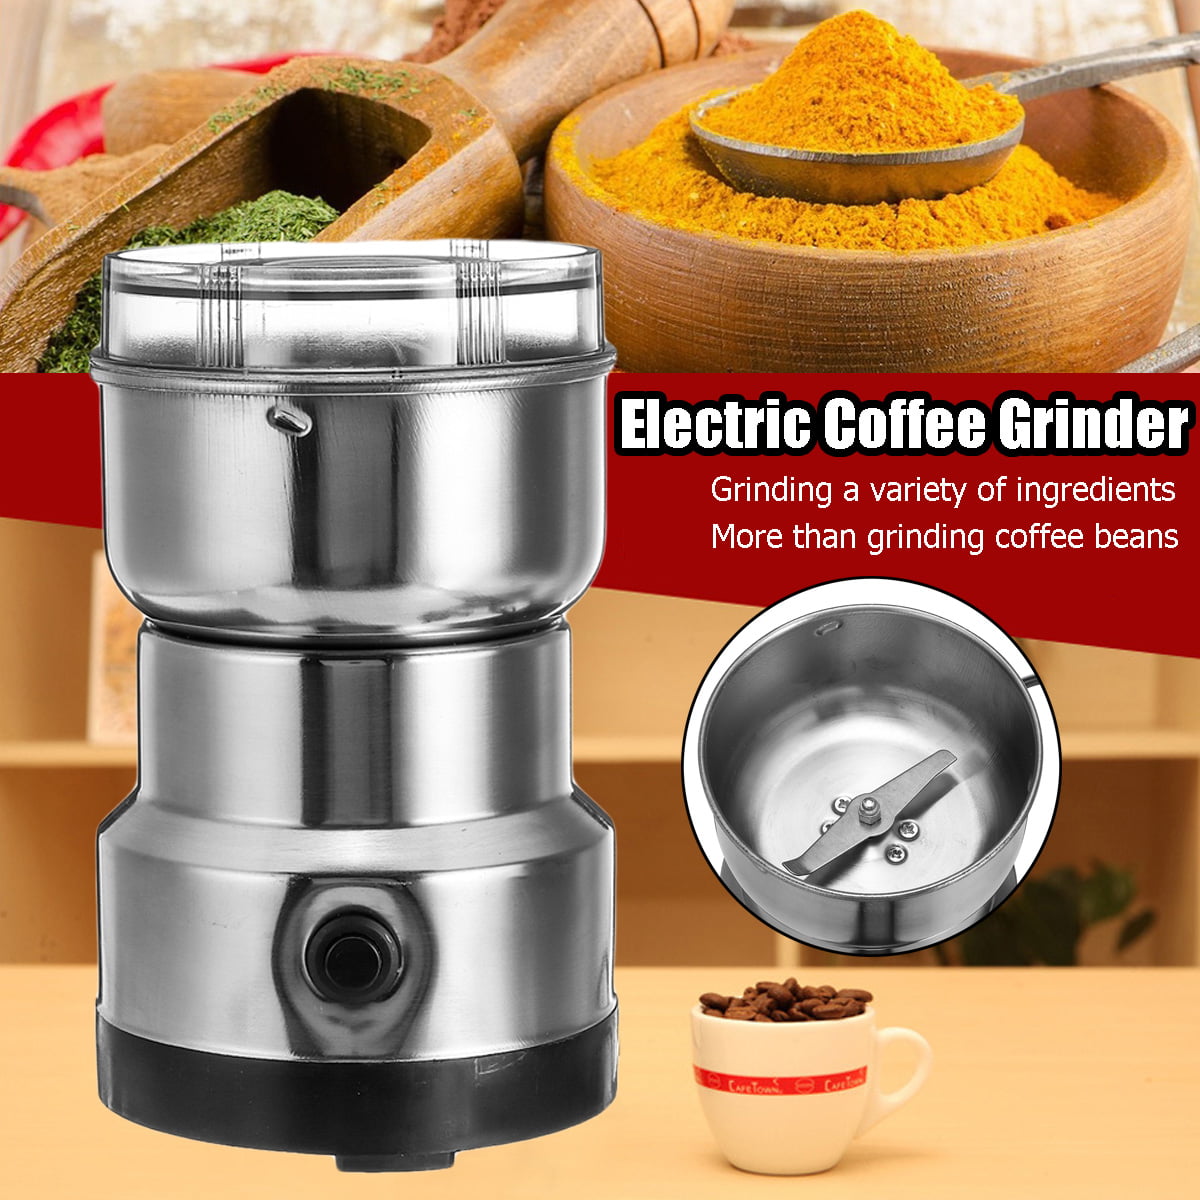 Coffee Bean Herbs Electric Coffee Grinder Sararoom Coffee Bean and Spice Grinder Mill 110V Low Noise DC Motor with Stainless Steel Body and Blades for Burr Spices Grains and More Nuts 